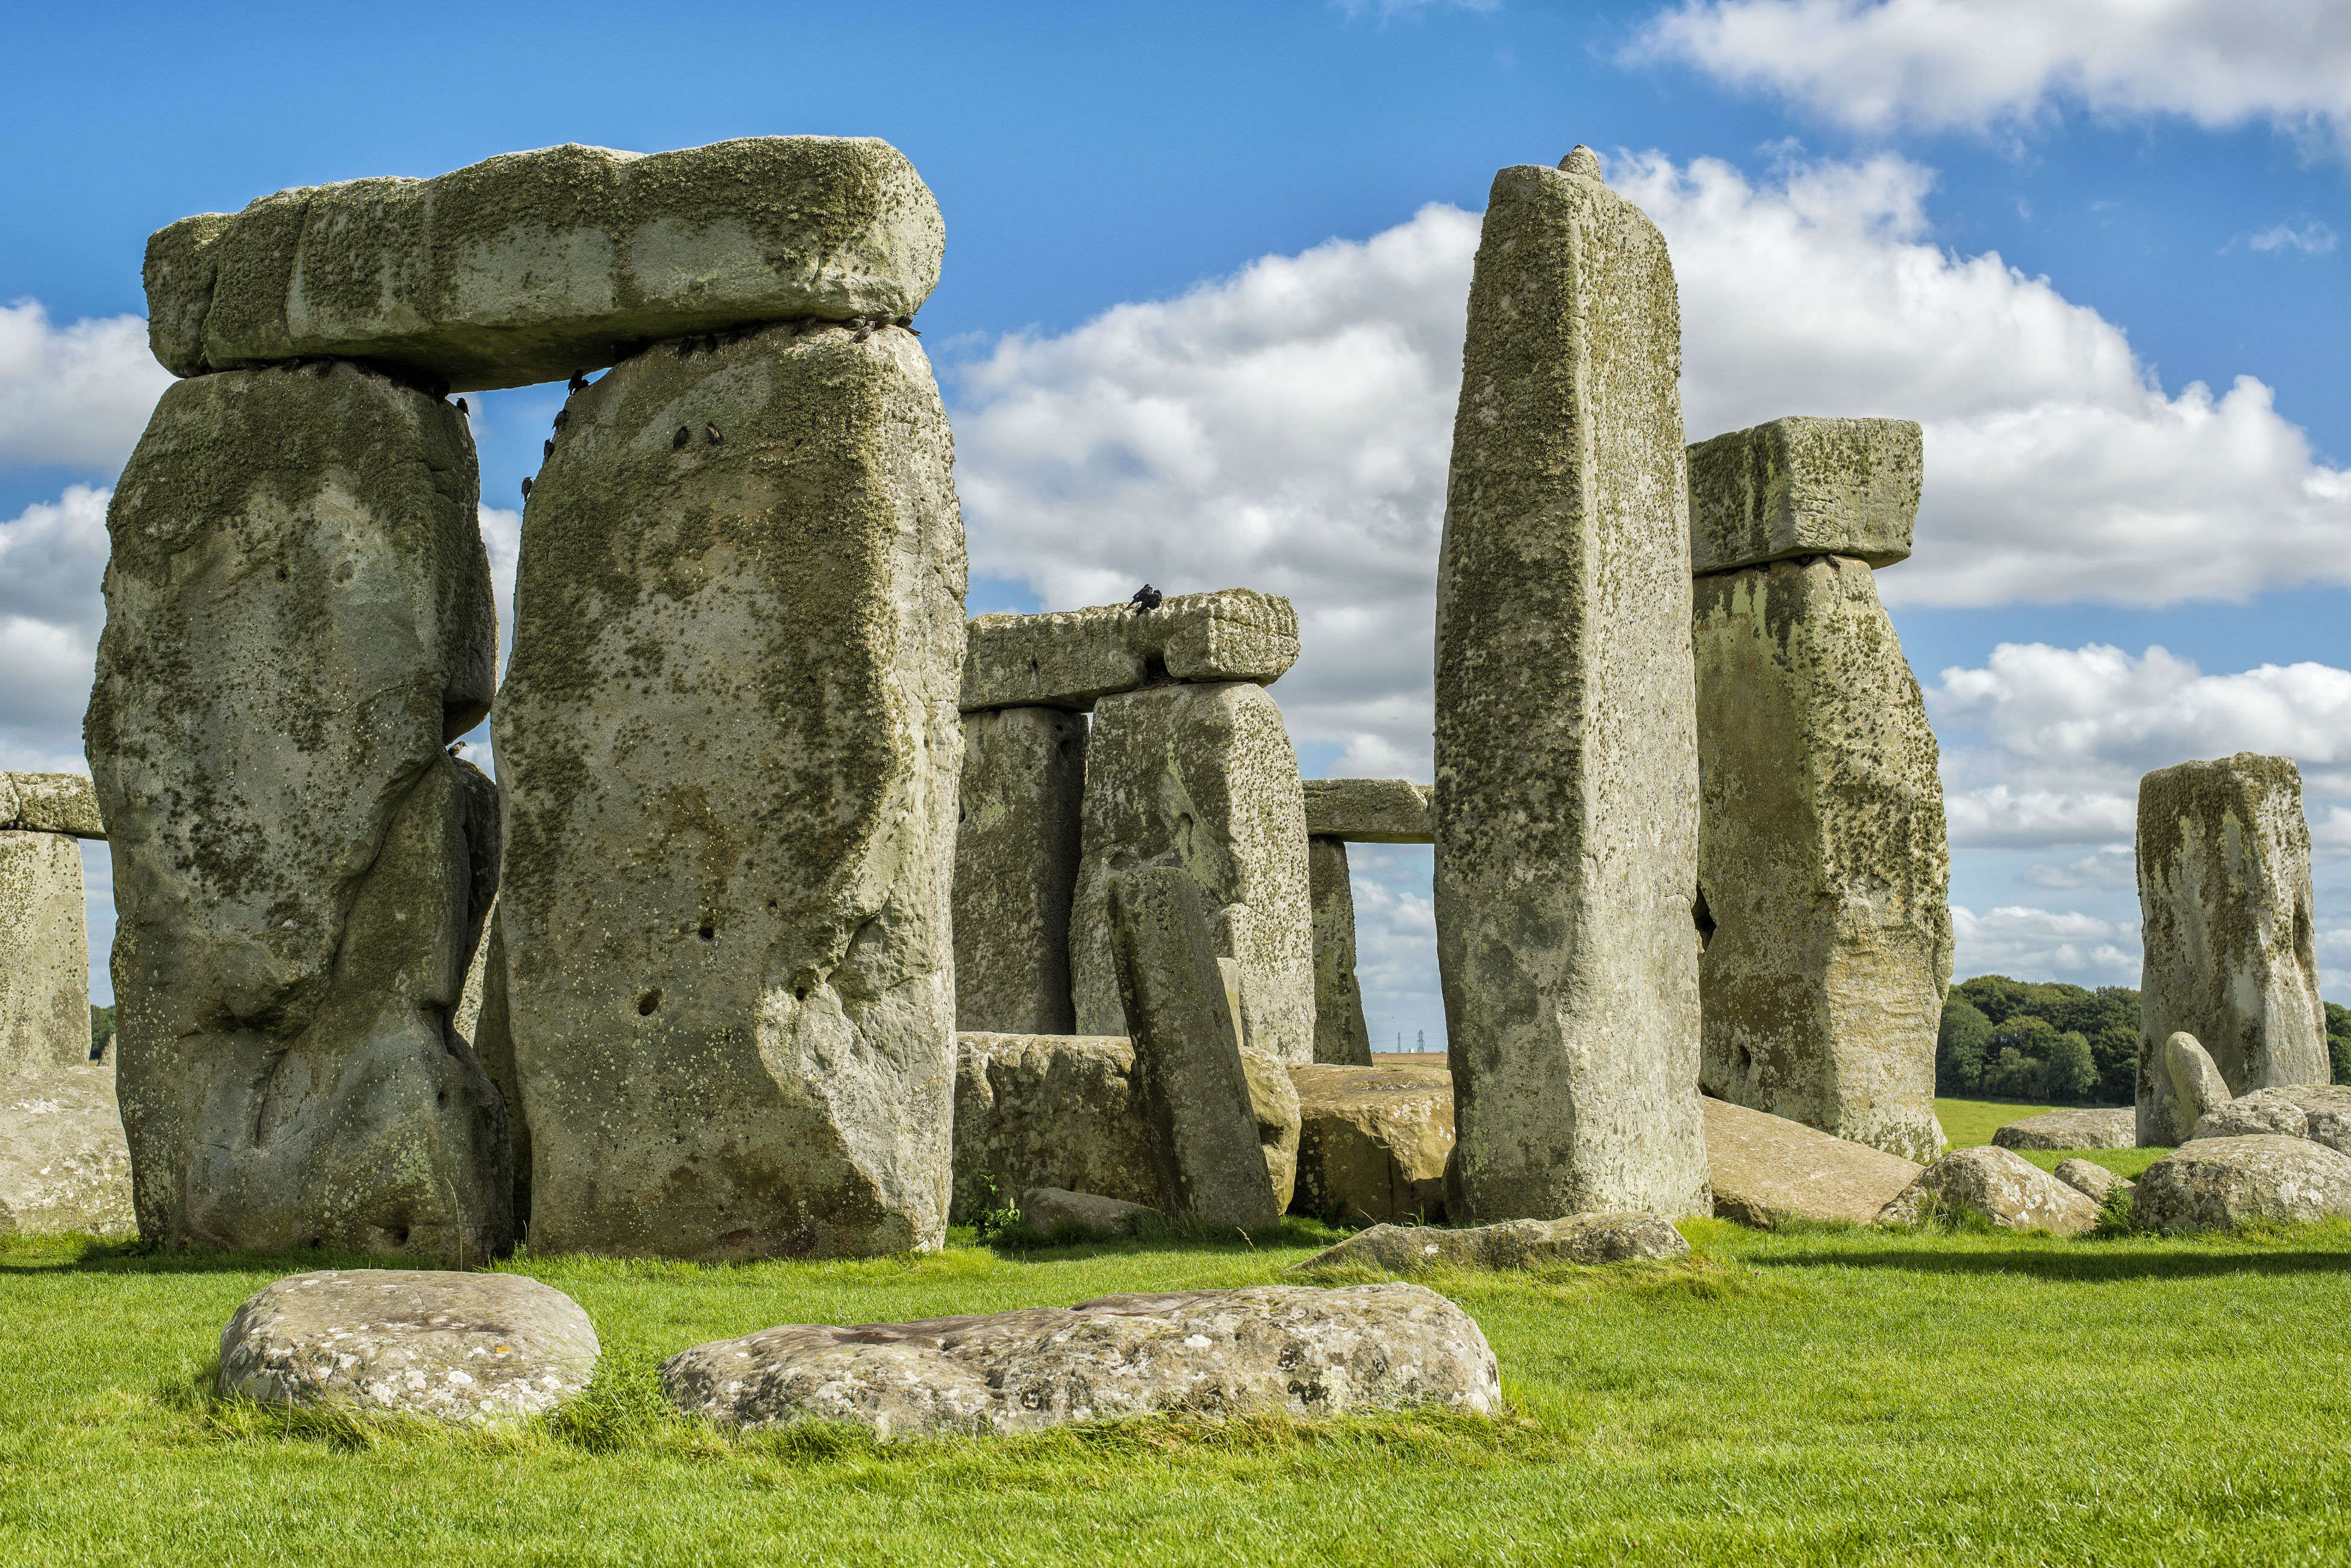 Missing piece of Stonehenge returns after 60 years | Times of India Travel